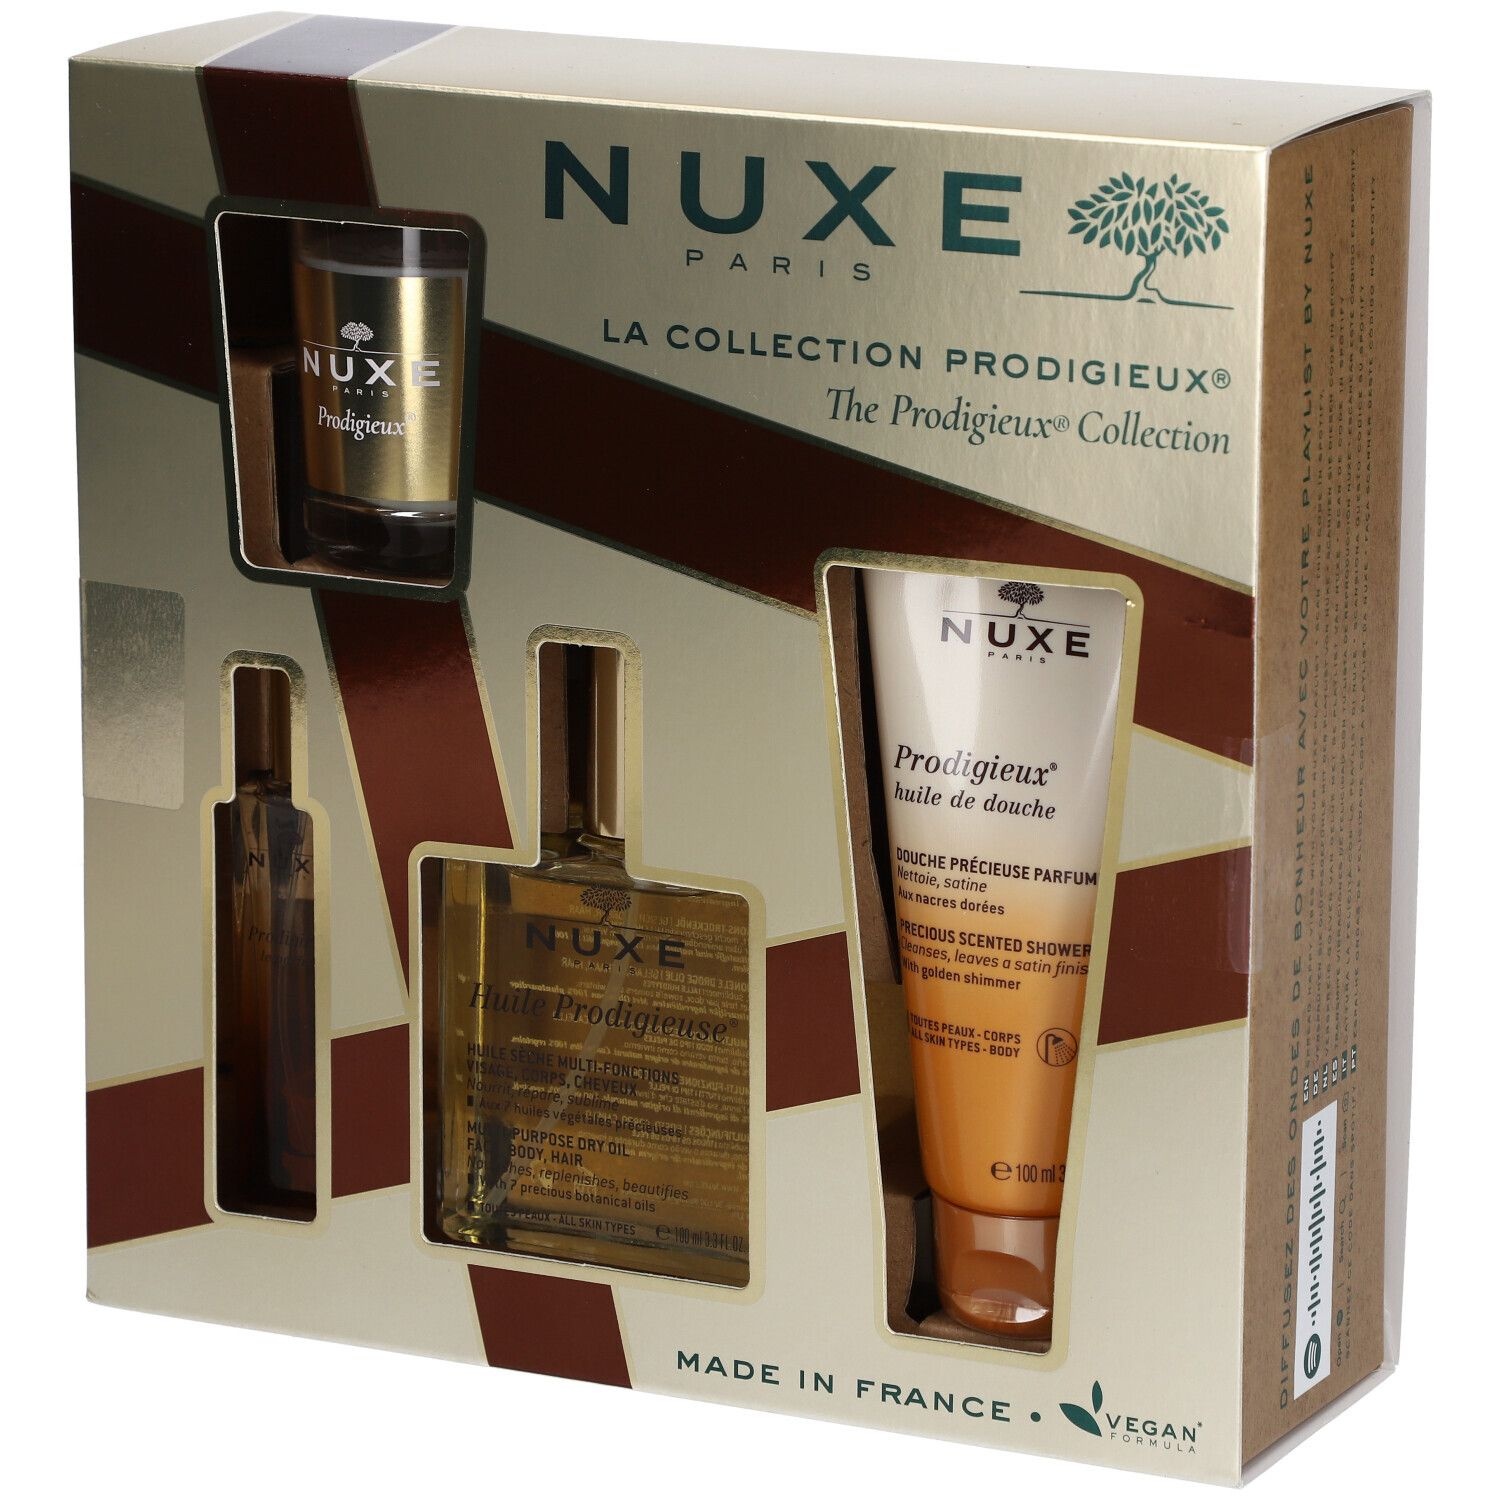 NUXE Le collection Prodigieux® 1 pc(s) emballage(s) combi